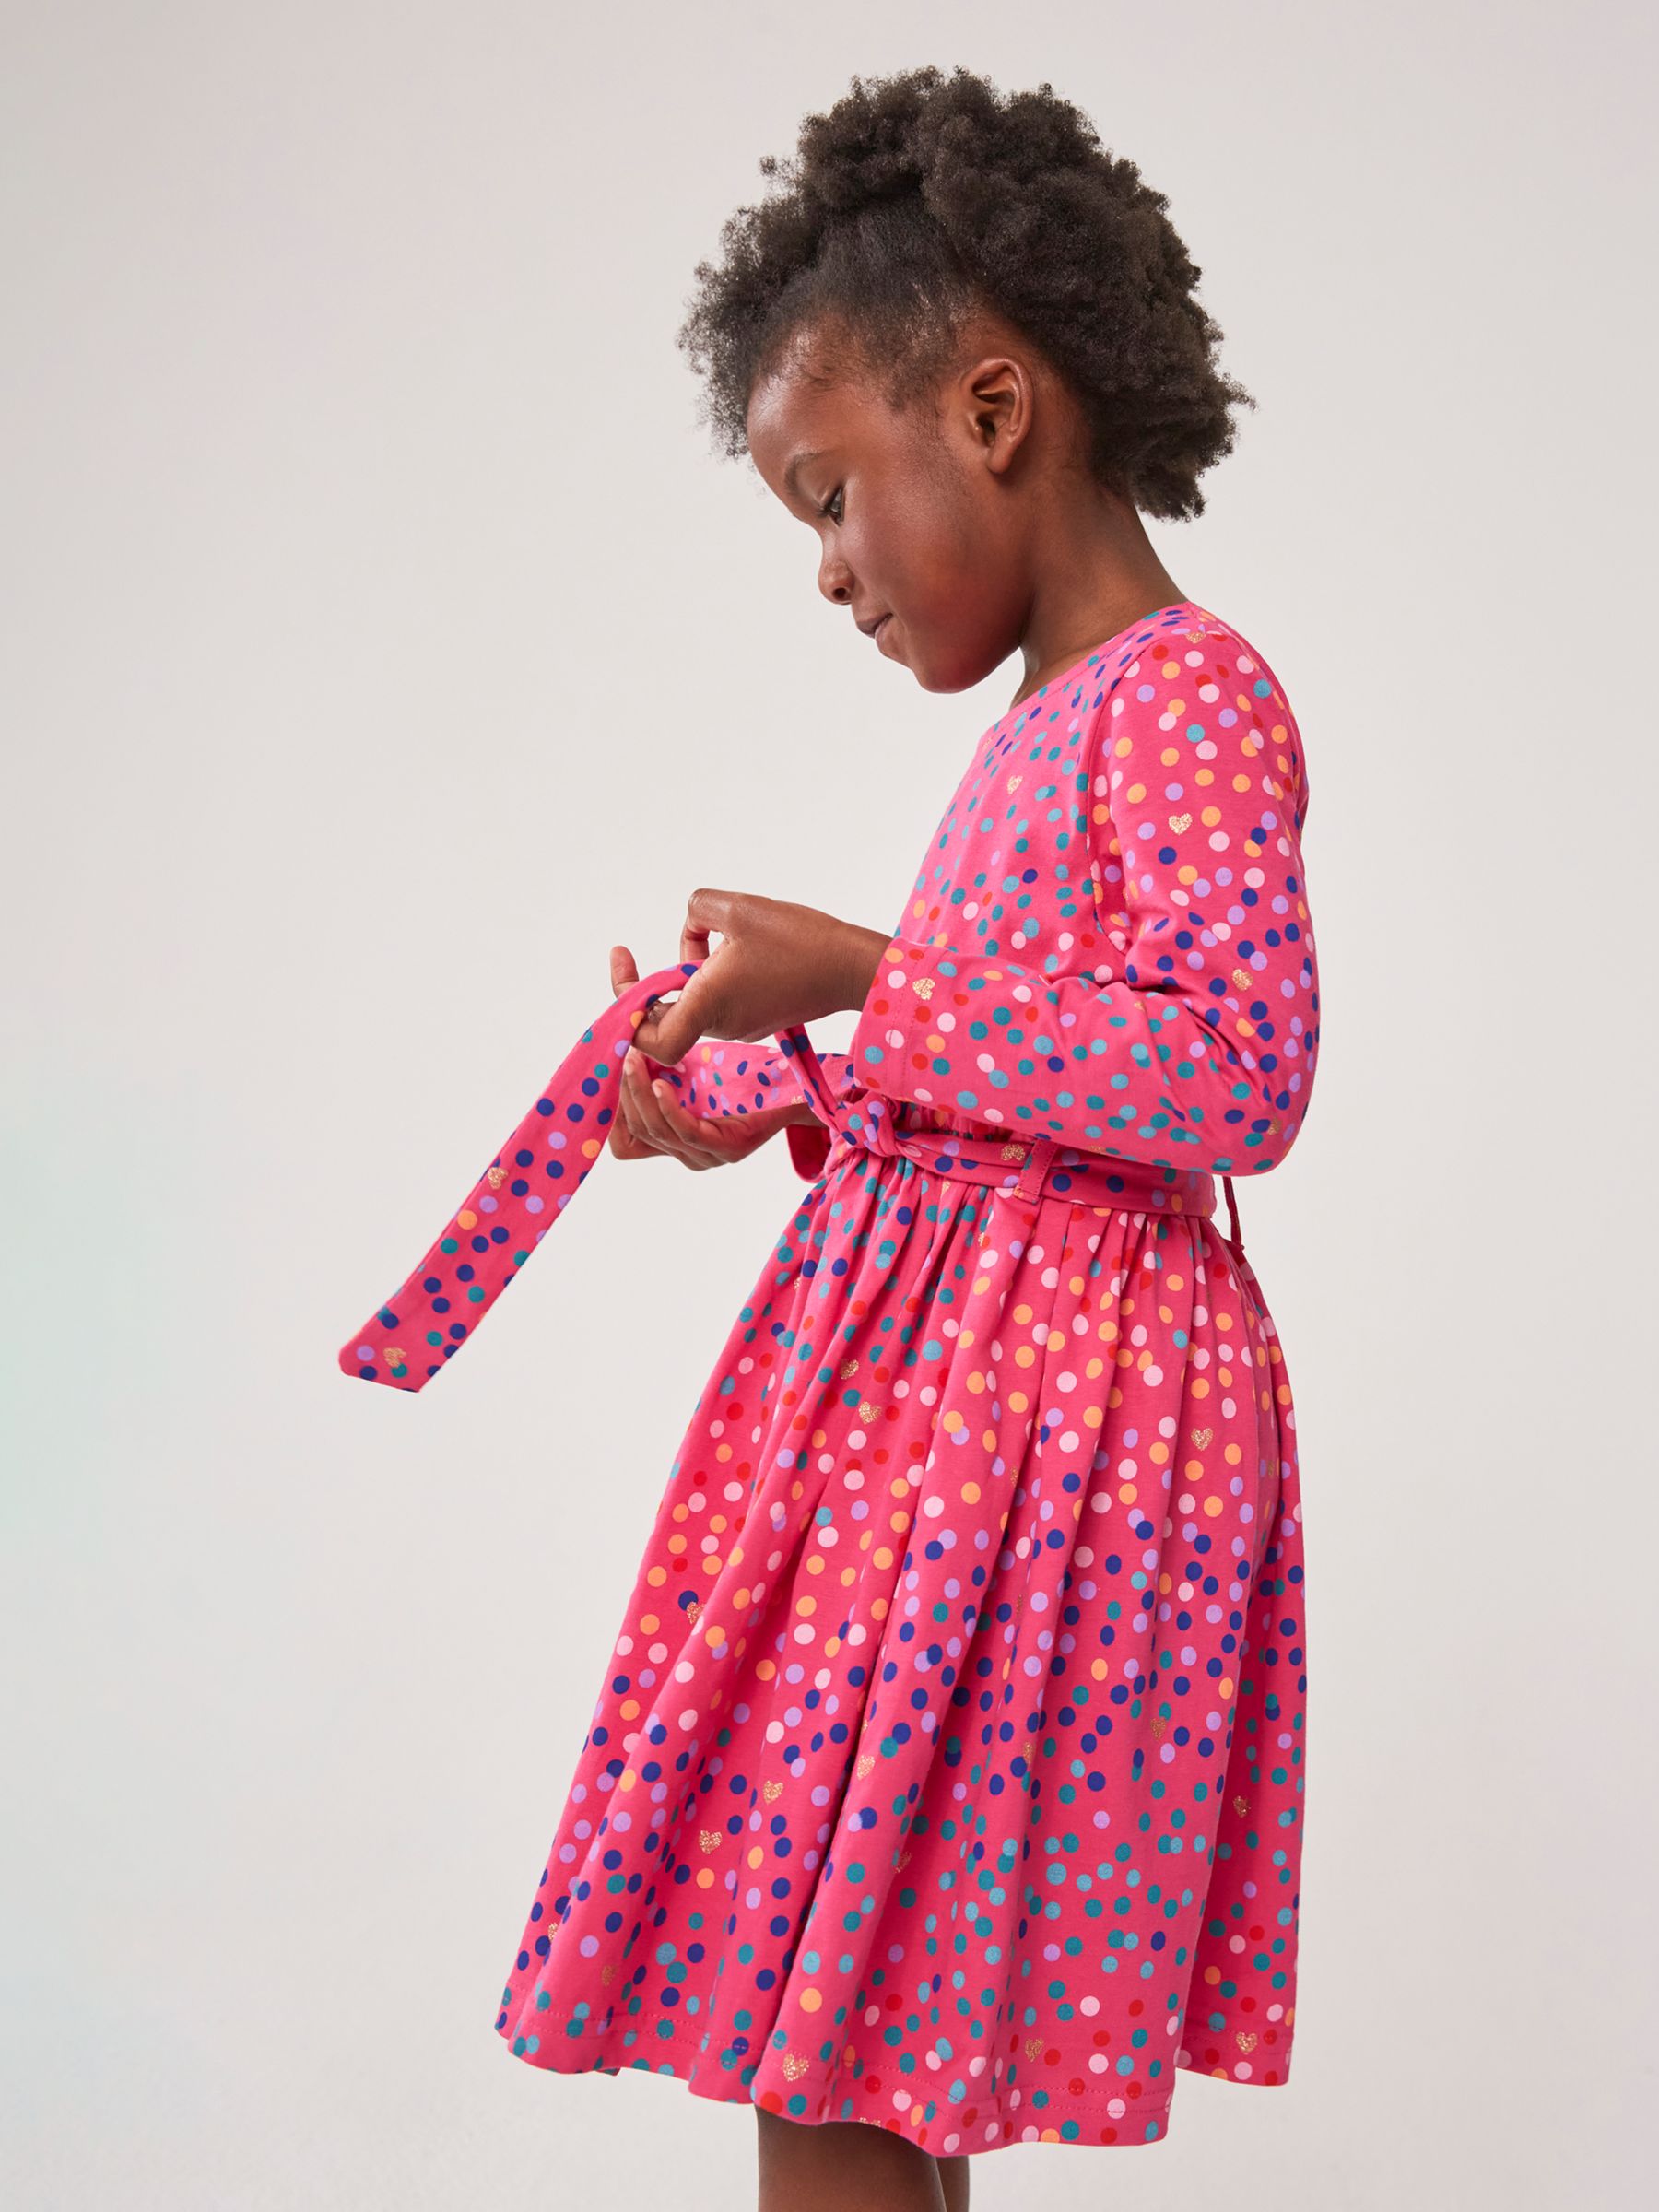 Buy Crew Clothing Kids' Printed Cotton Jersey Dress, Mid Pink Online at johnlewis.com